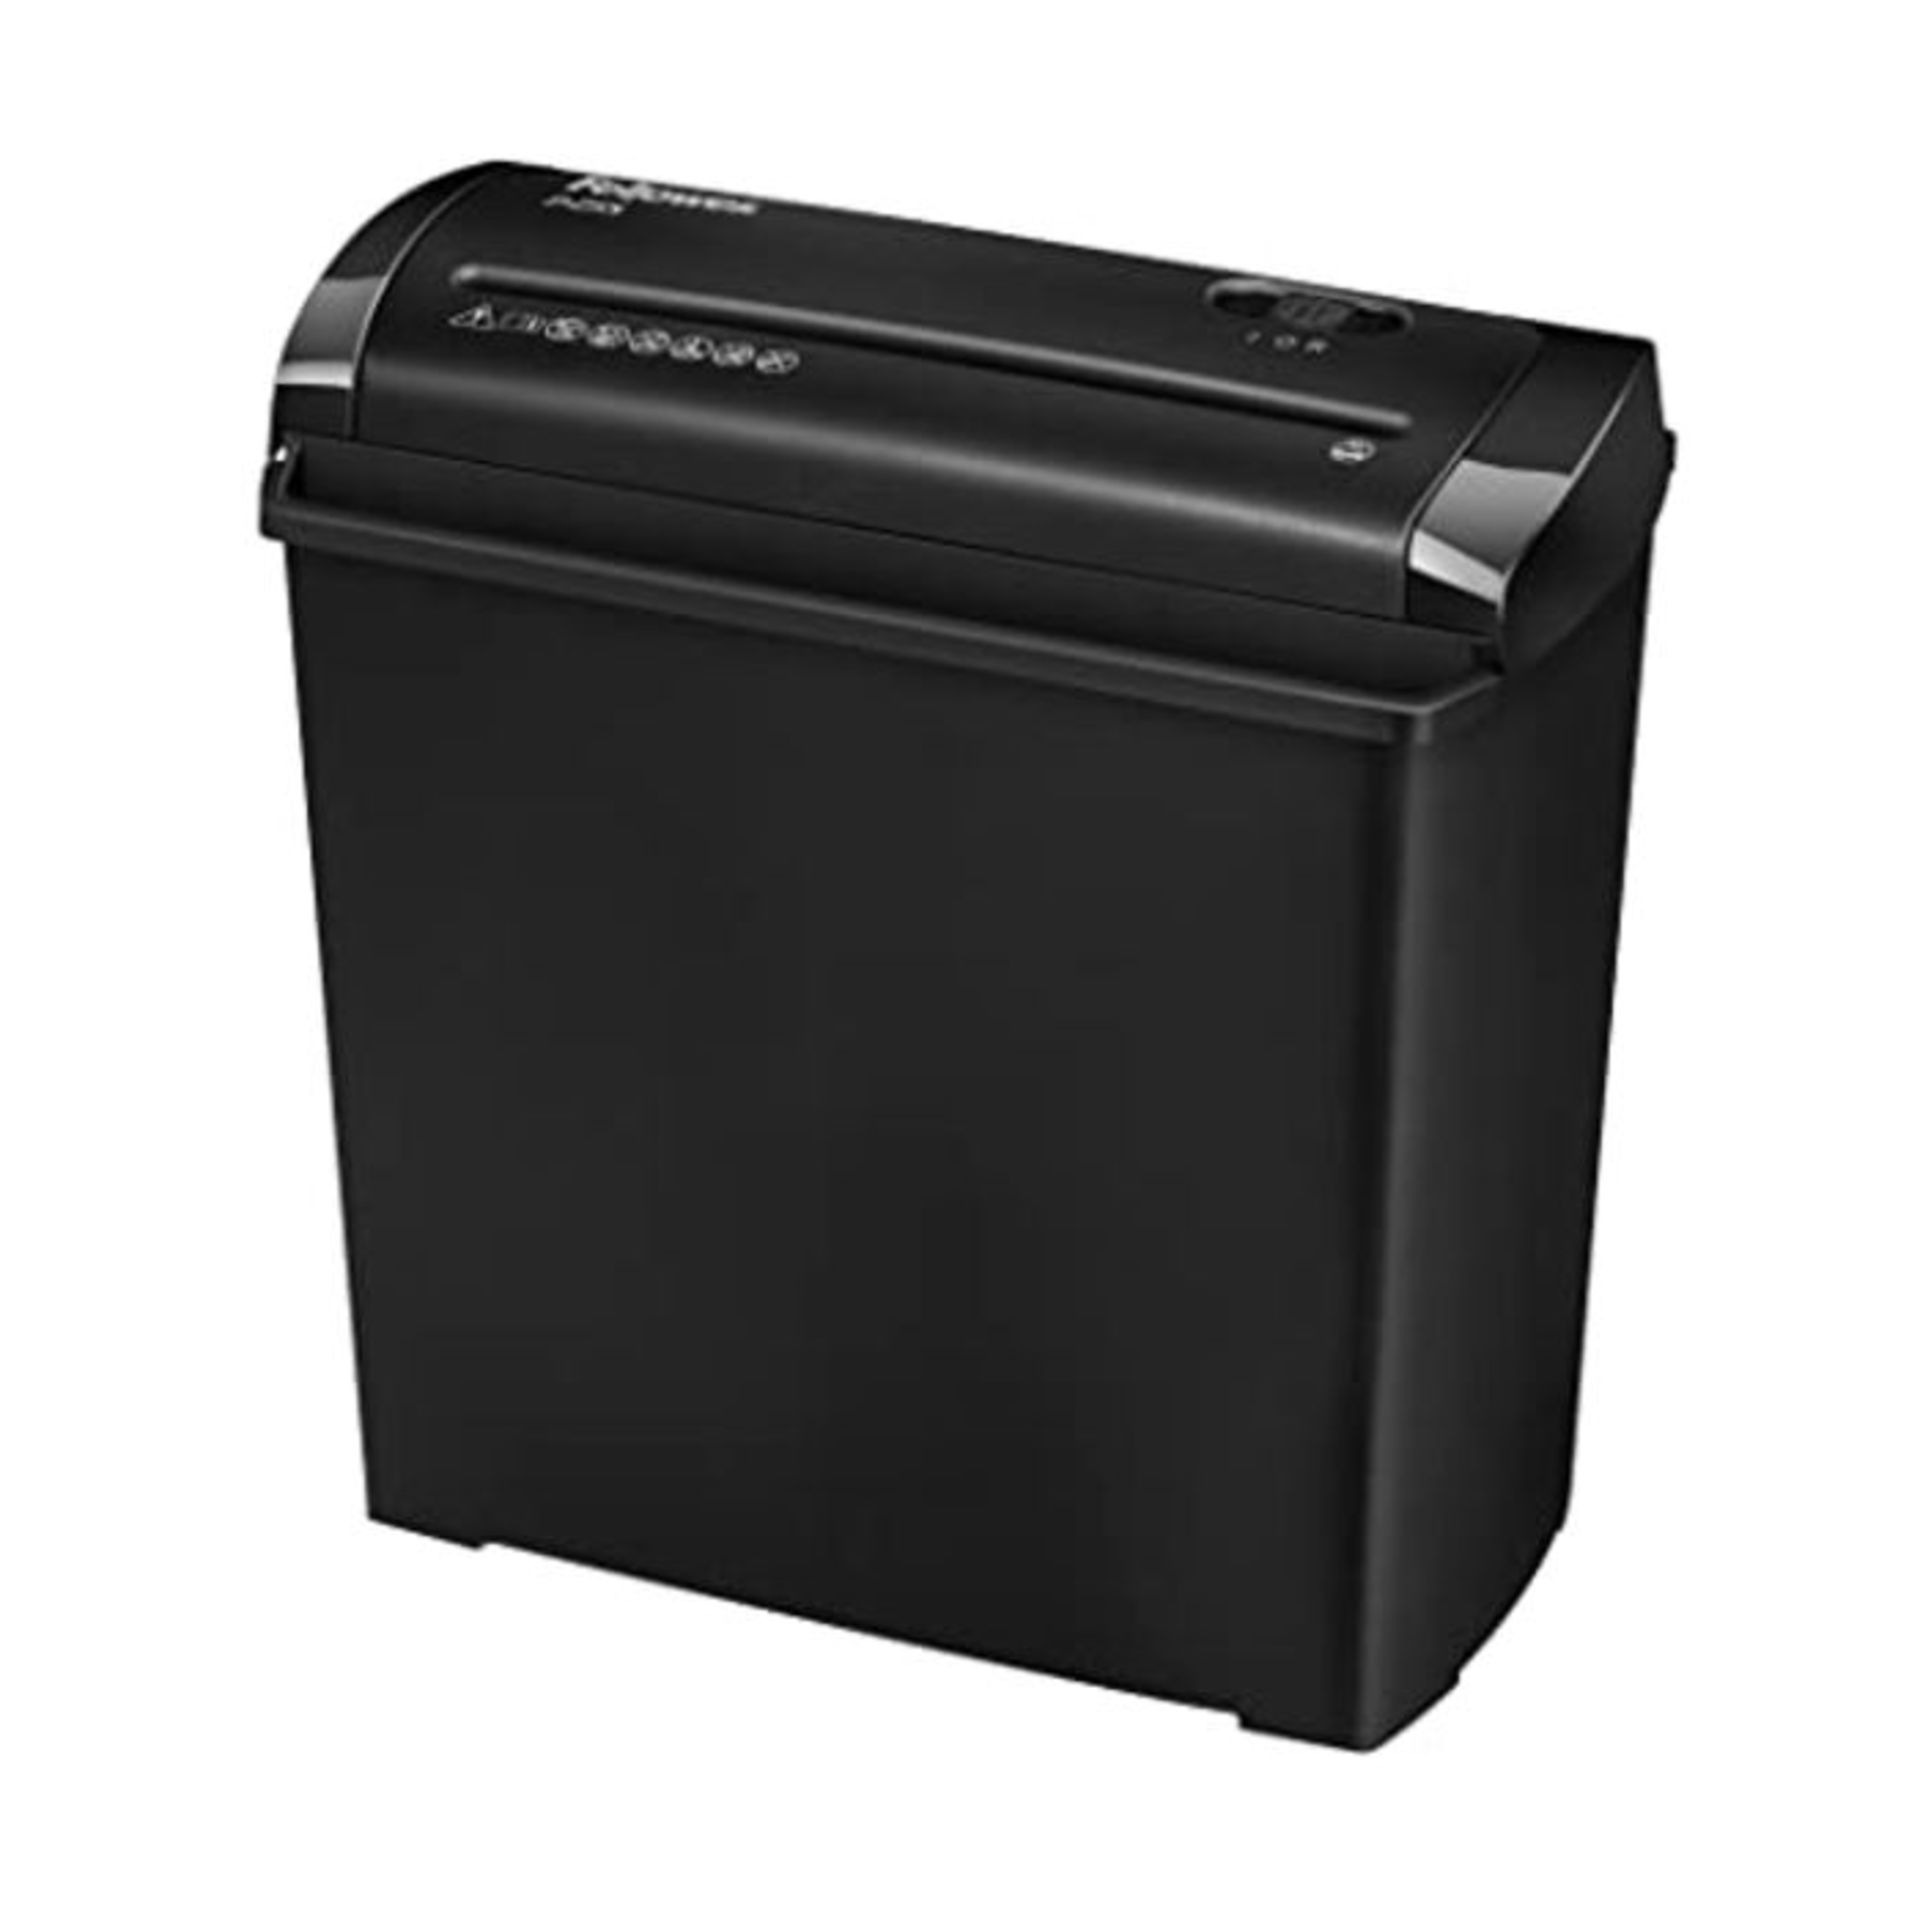 Fellowes P-25S Basic Security Strip Cut Personal Shredder, Shreds 5 A4 Sheets into an